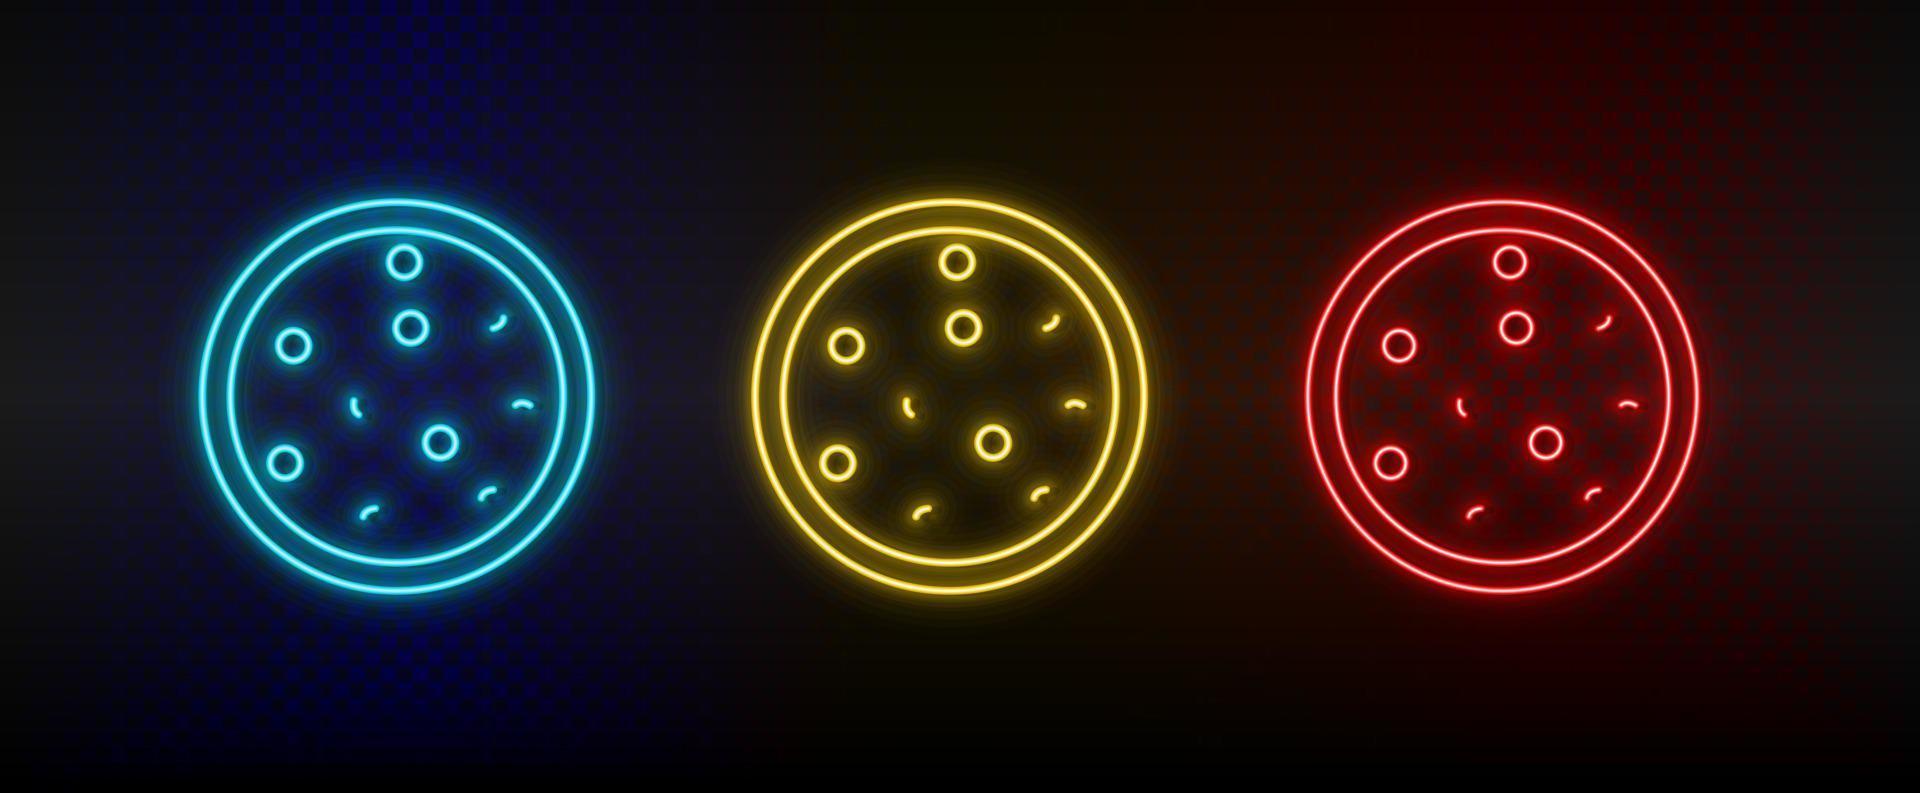 Neon icon set pizza. Set of red, blue, yellow neon vector icon on dark background